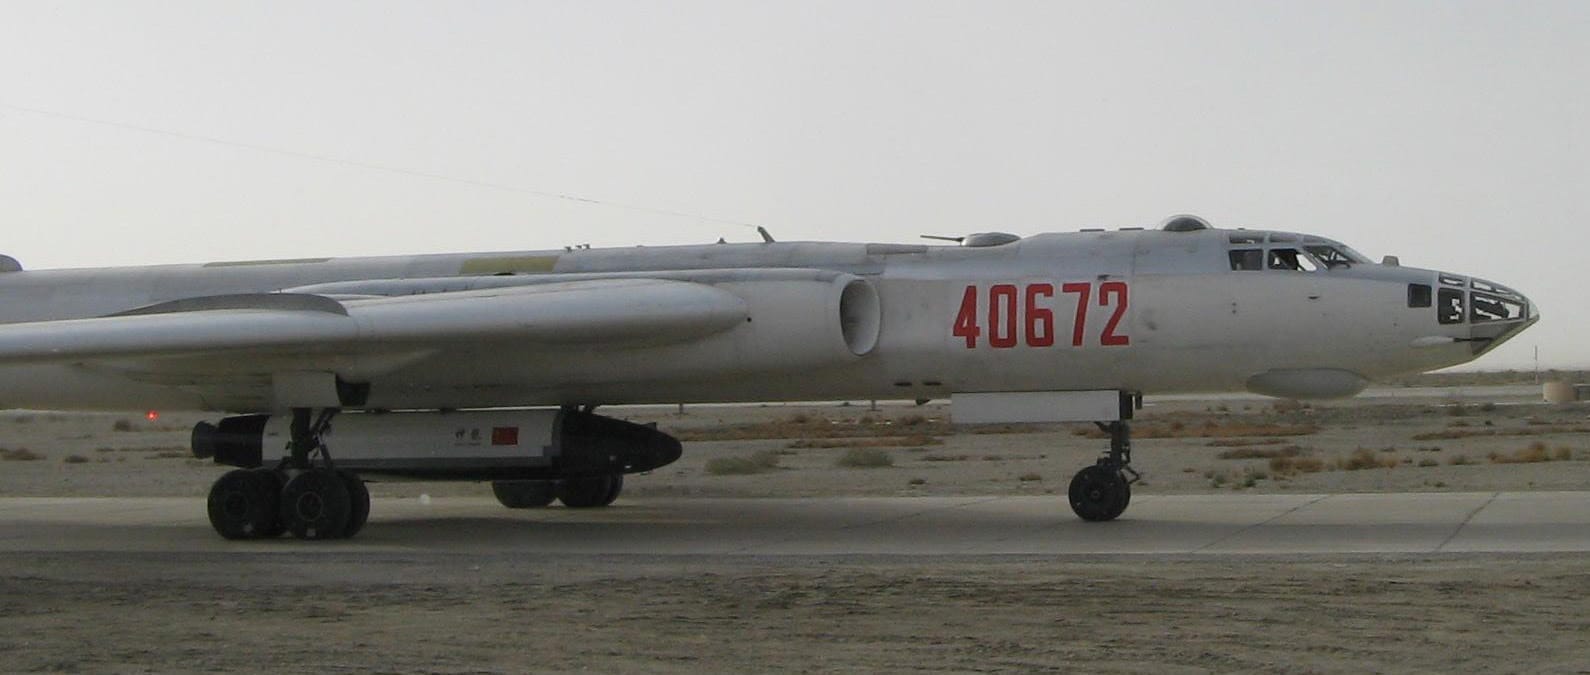 The spaceplane vehicle's believed technology demonstrator underneath the H-6 bomber.